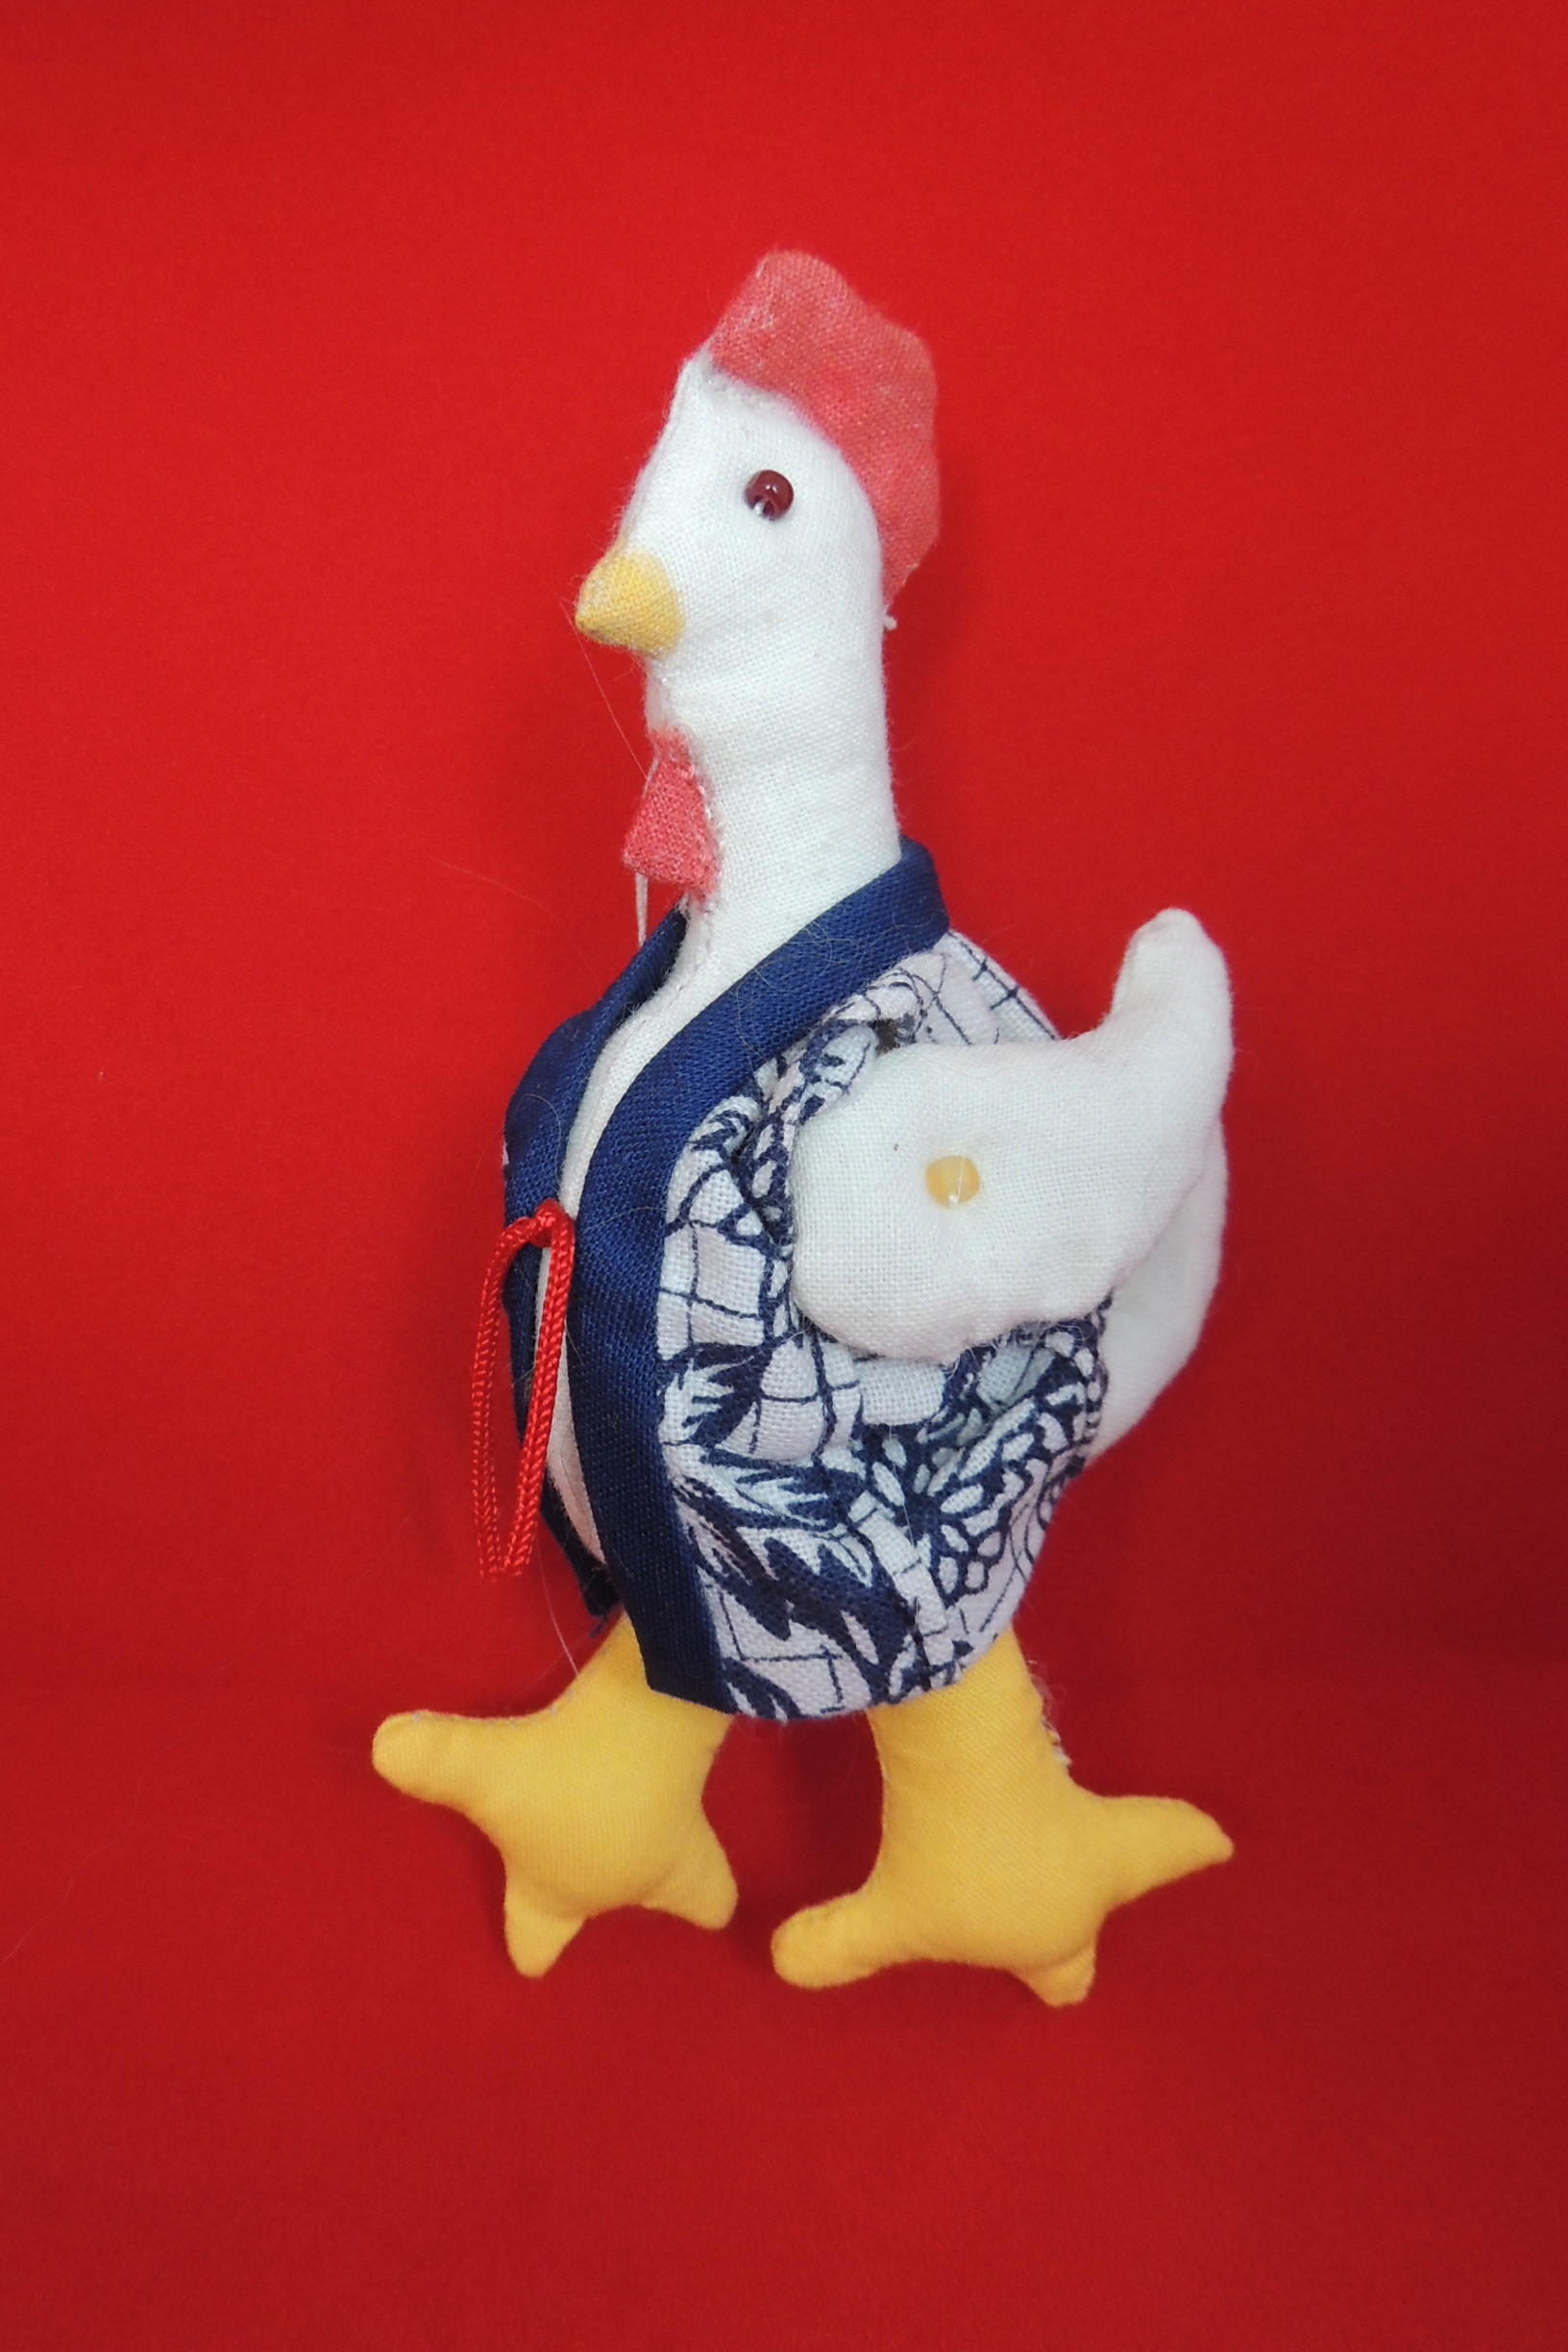 Ornament – Year of the Rooster